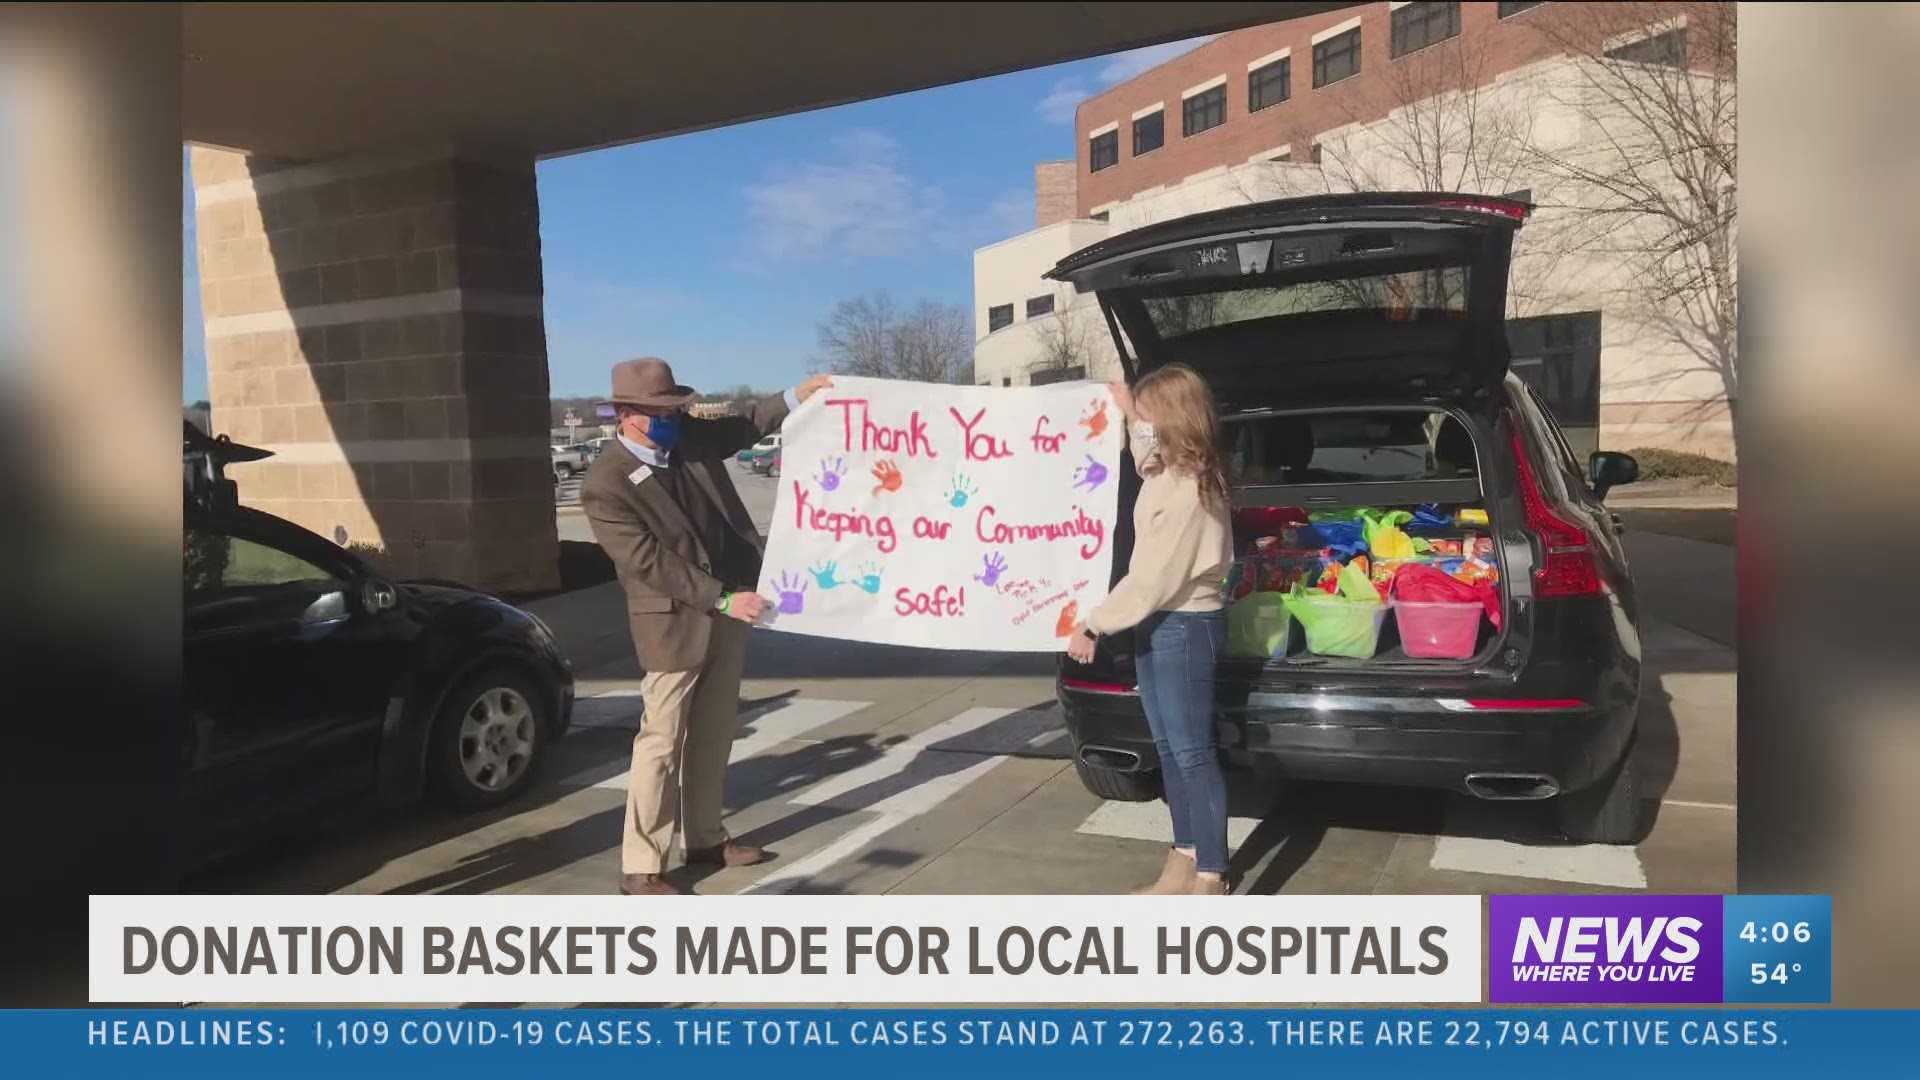 With Walmart's help, First United Methodist Church was able to hand out a few hundred snacks to frontline workers in Fort Smith.